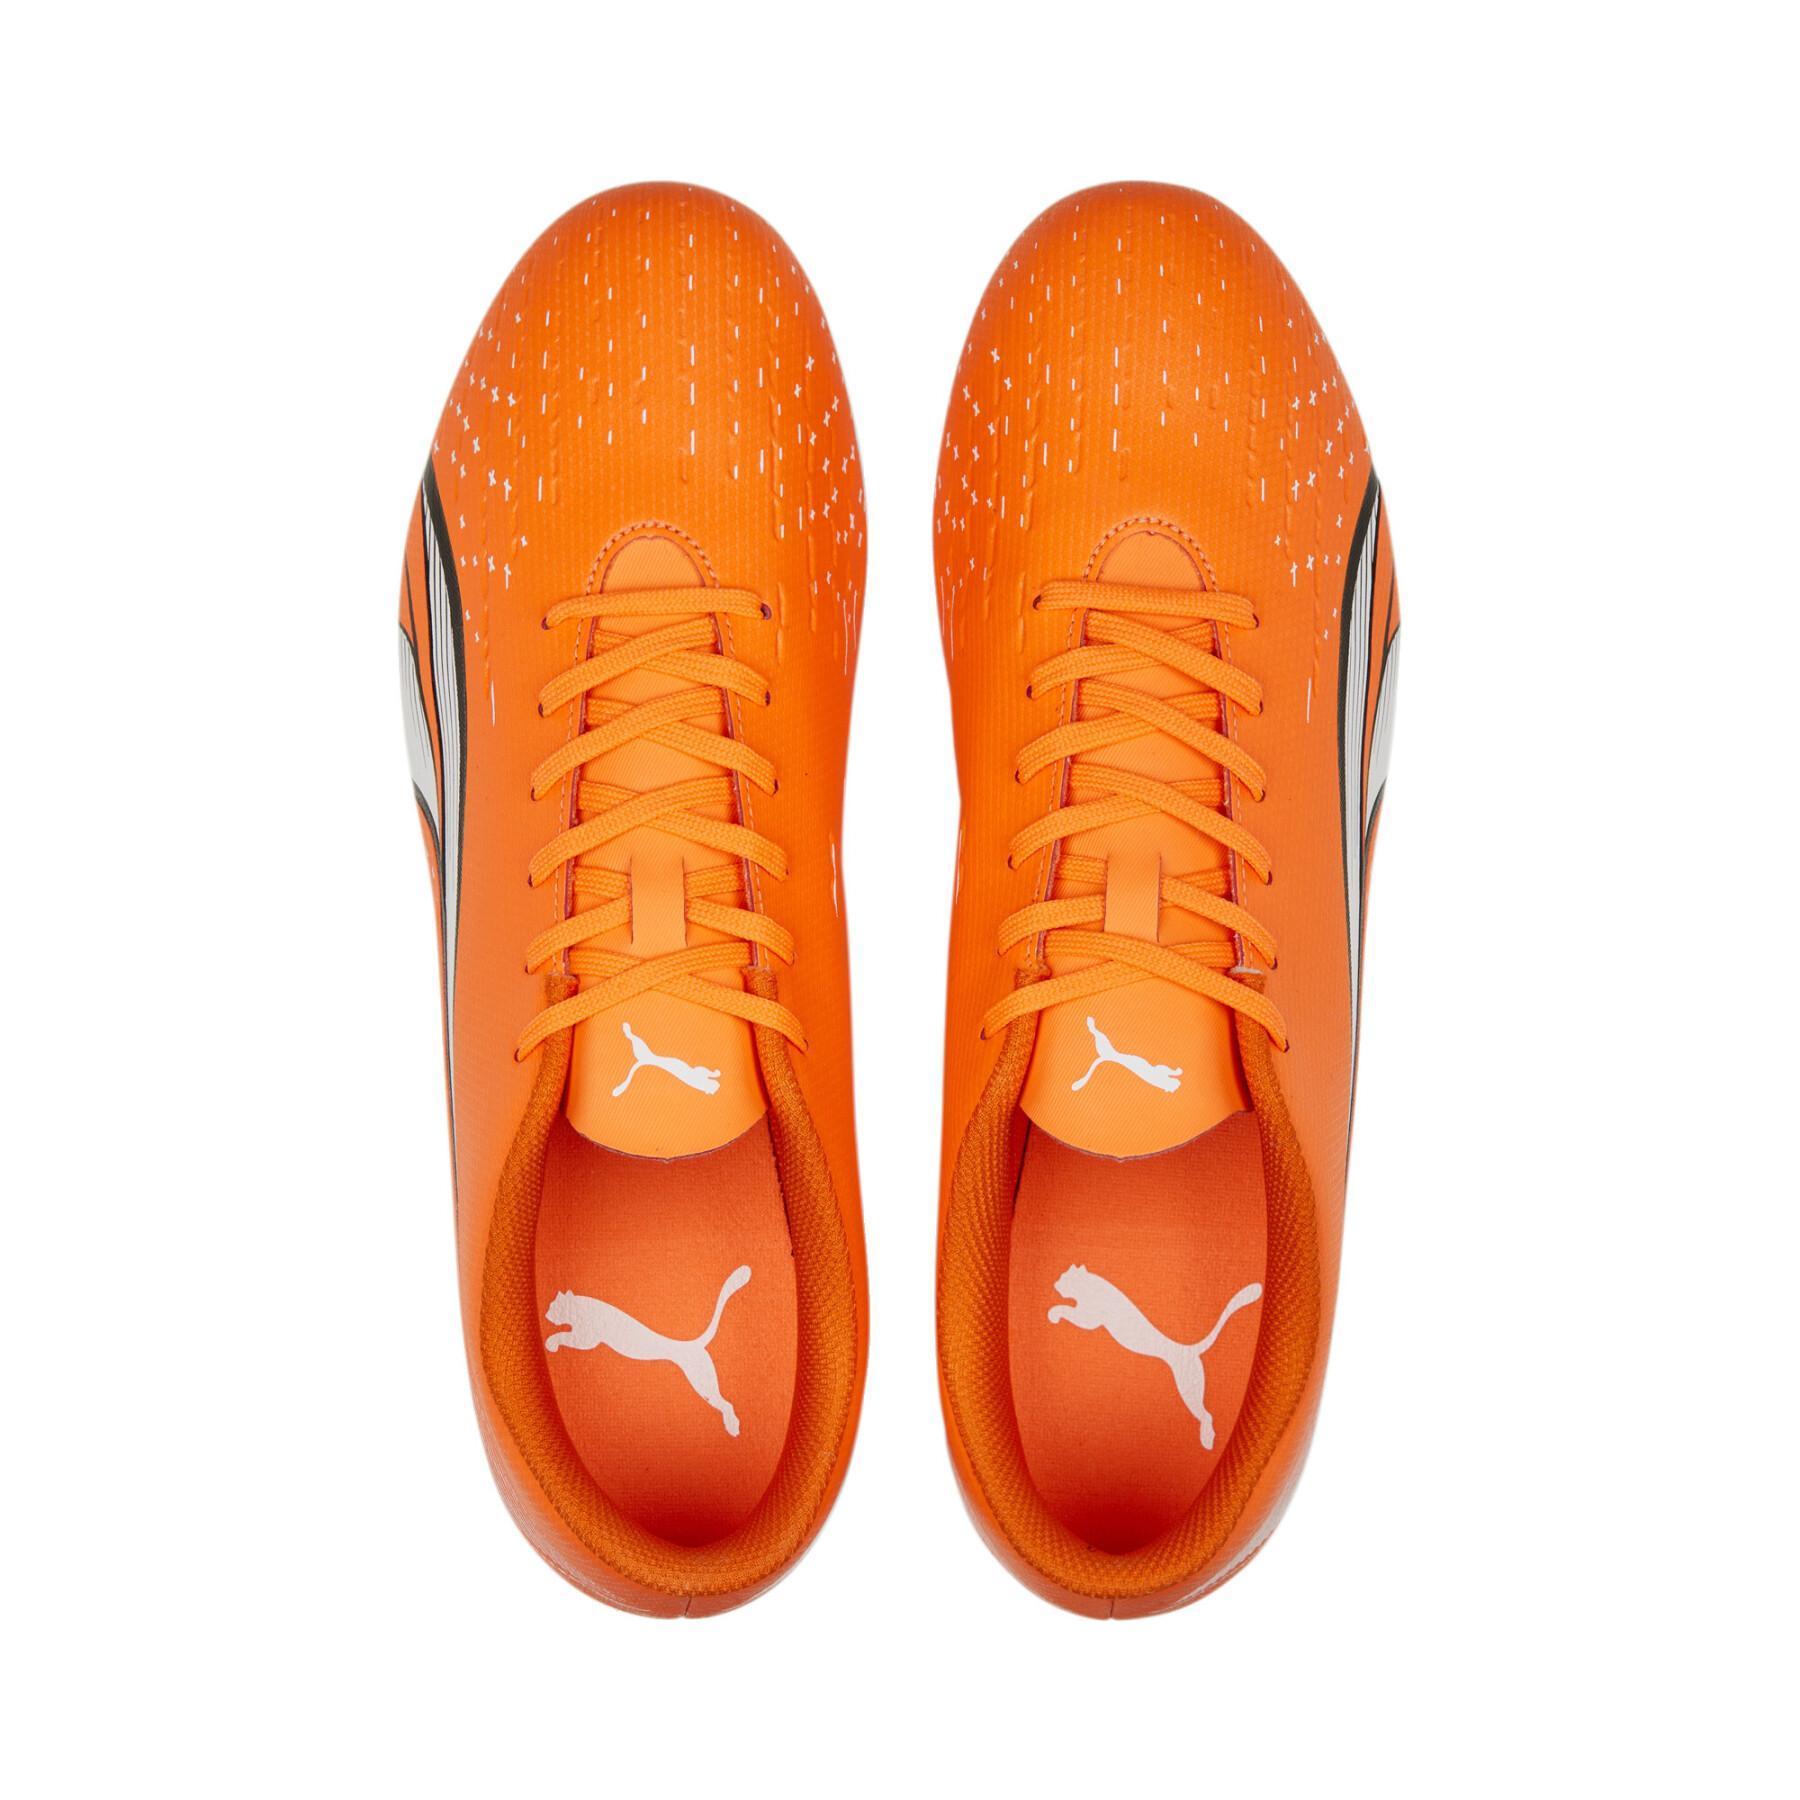 Voetbalschoenen Puma Ultra Play FG/AG - Supercharge